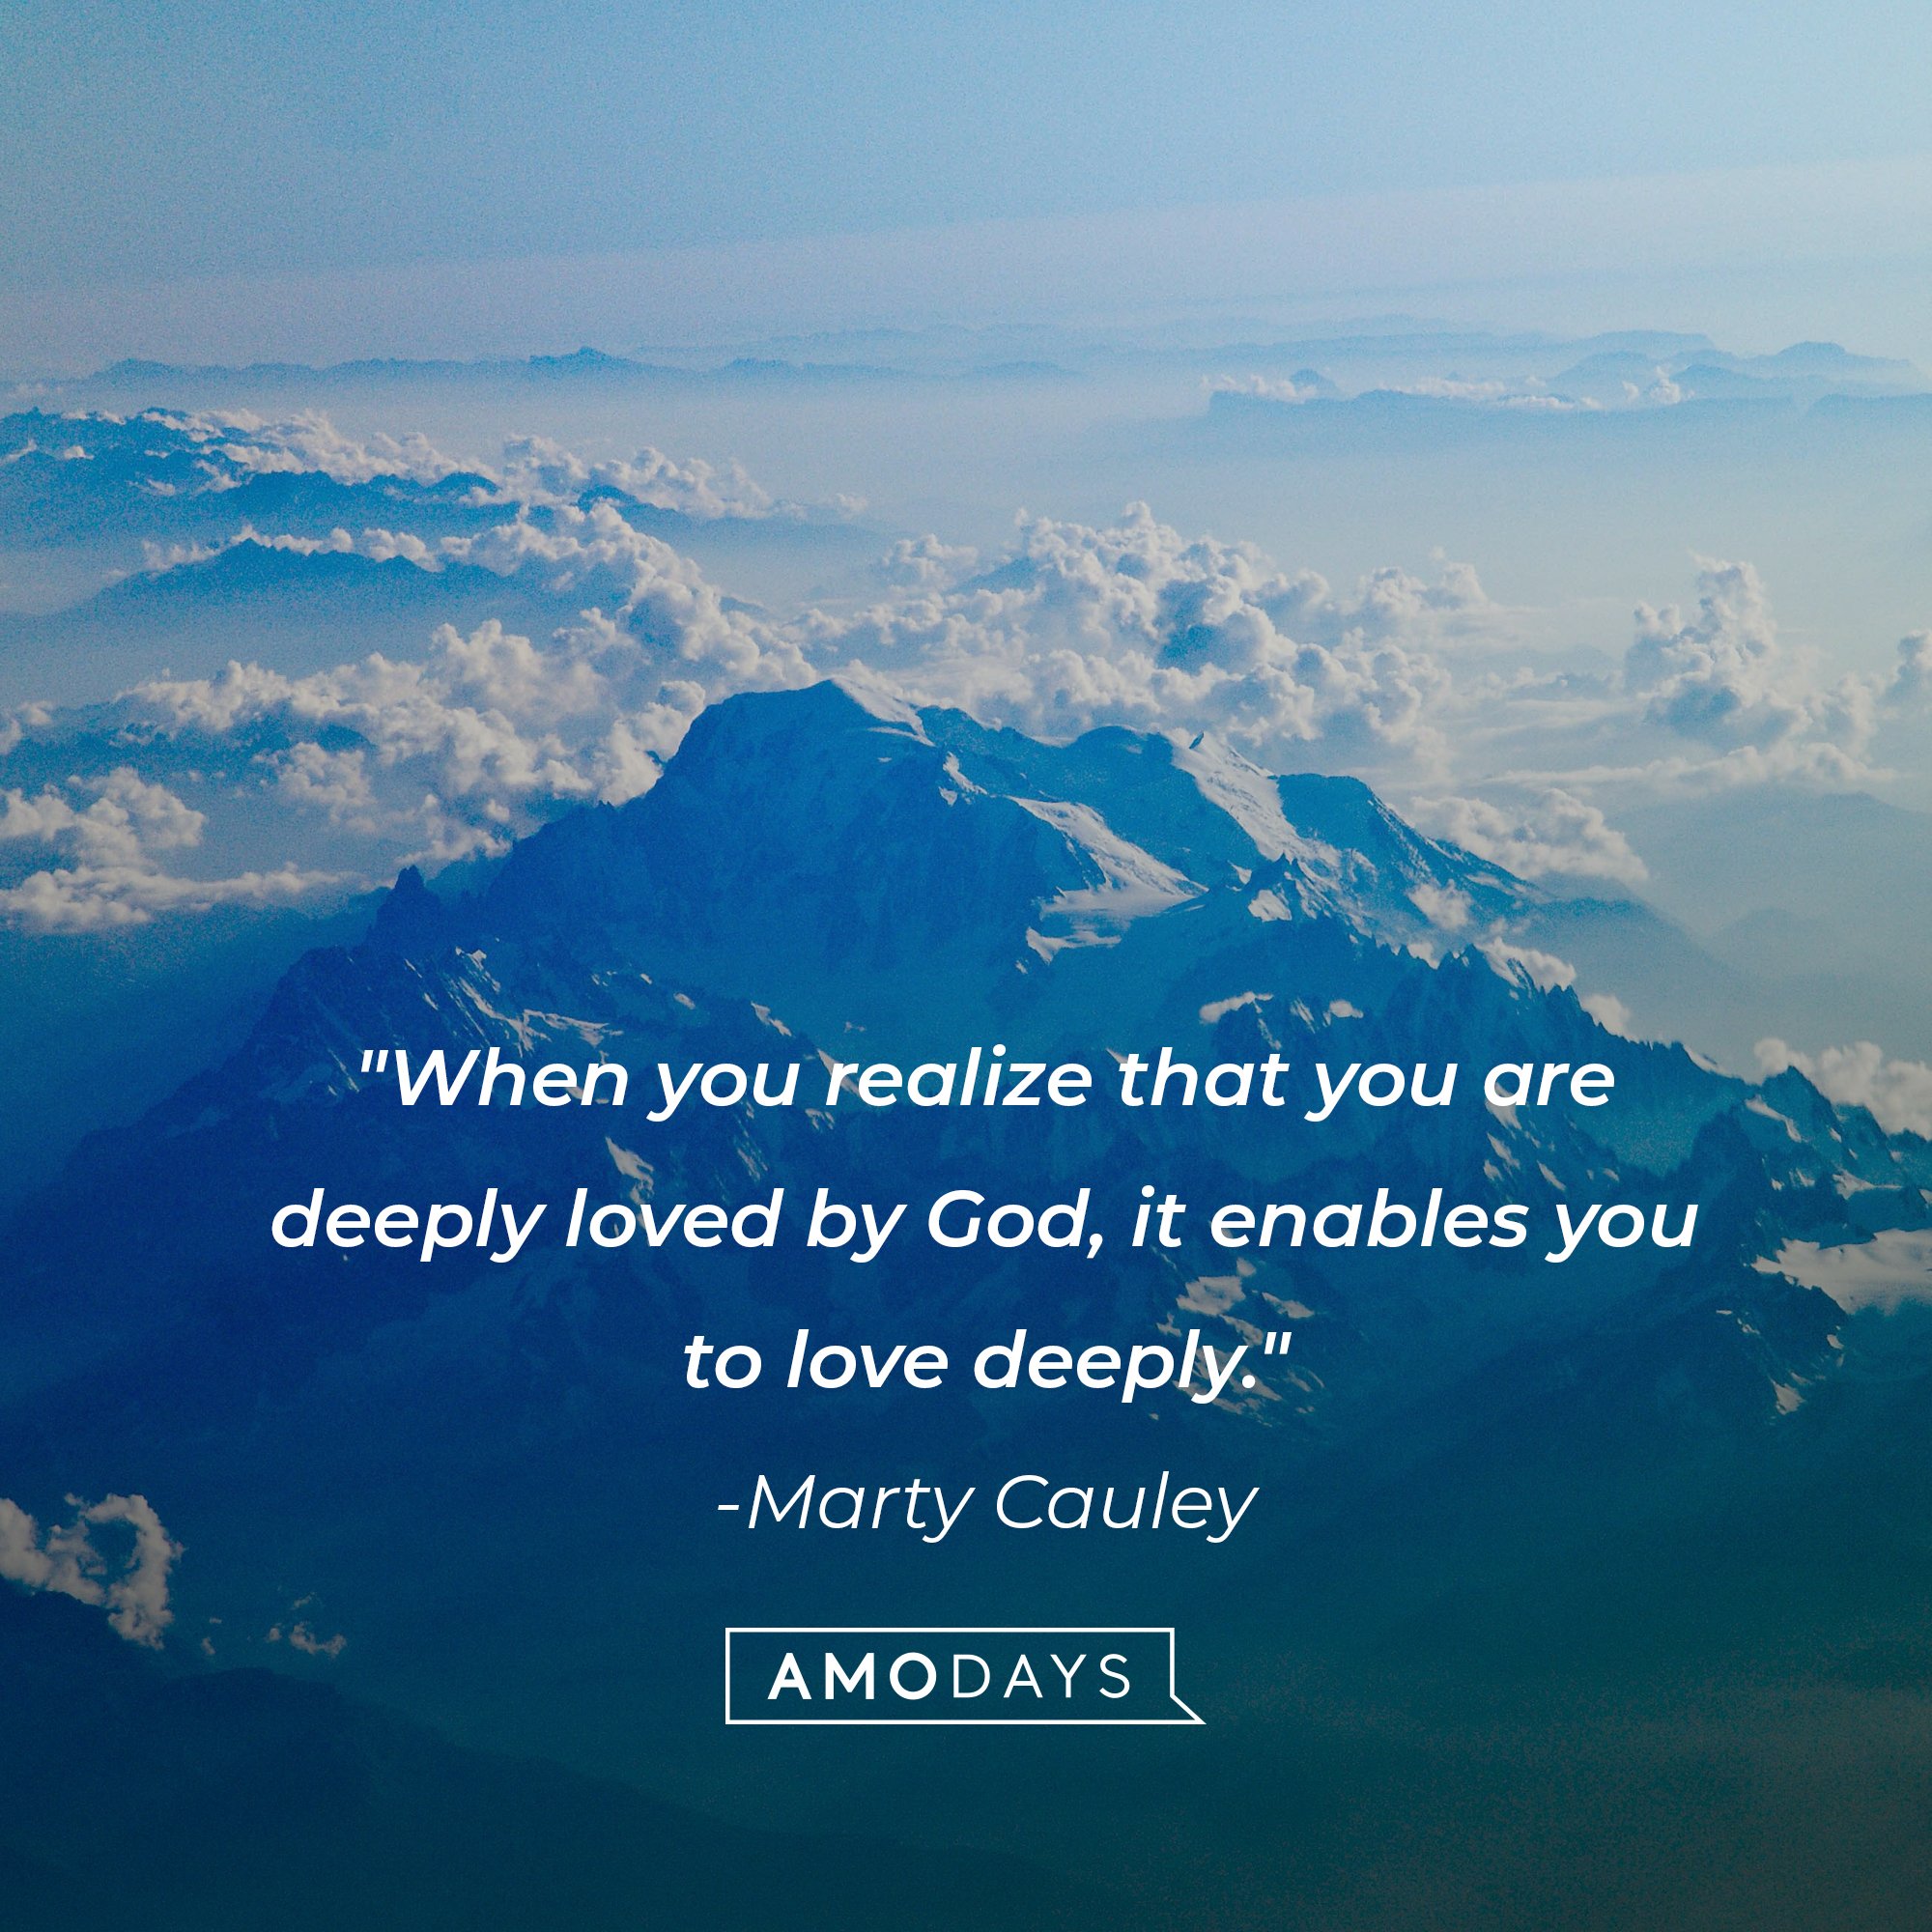 Marty Cauley’s quote: "When you realize that you are deeply loved by God, it enables you to love deeply." | Image: AmoDays